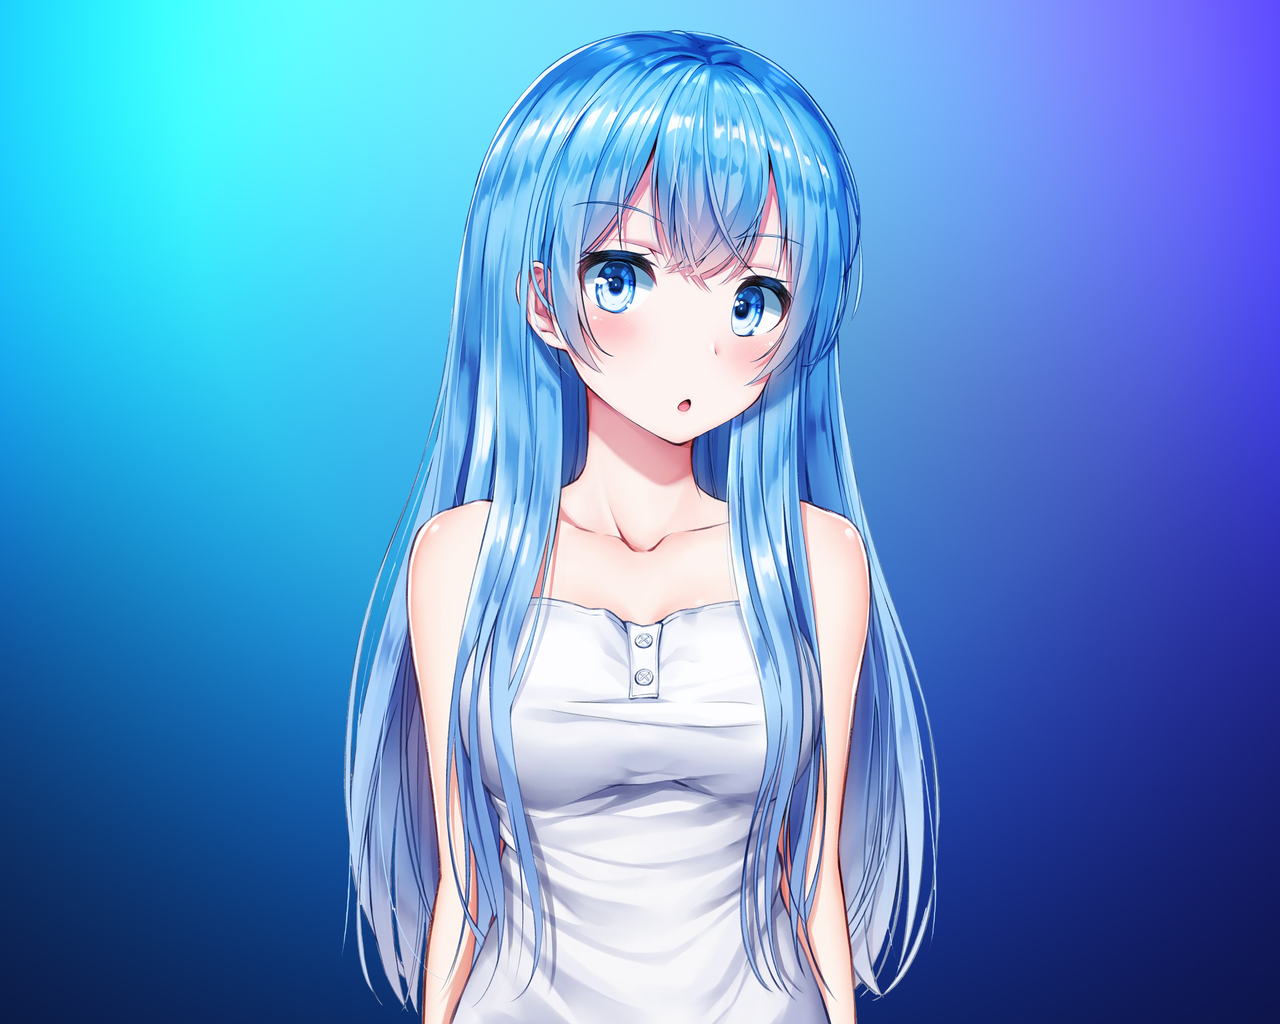 4. "Blue Haired Busty Anime Girl" - wide 5